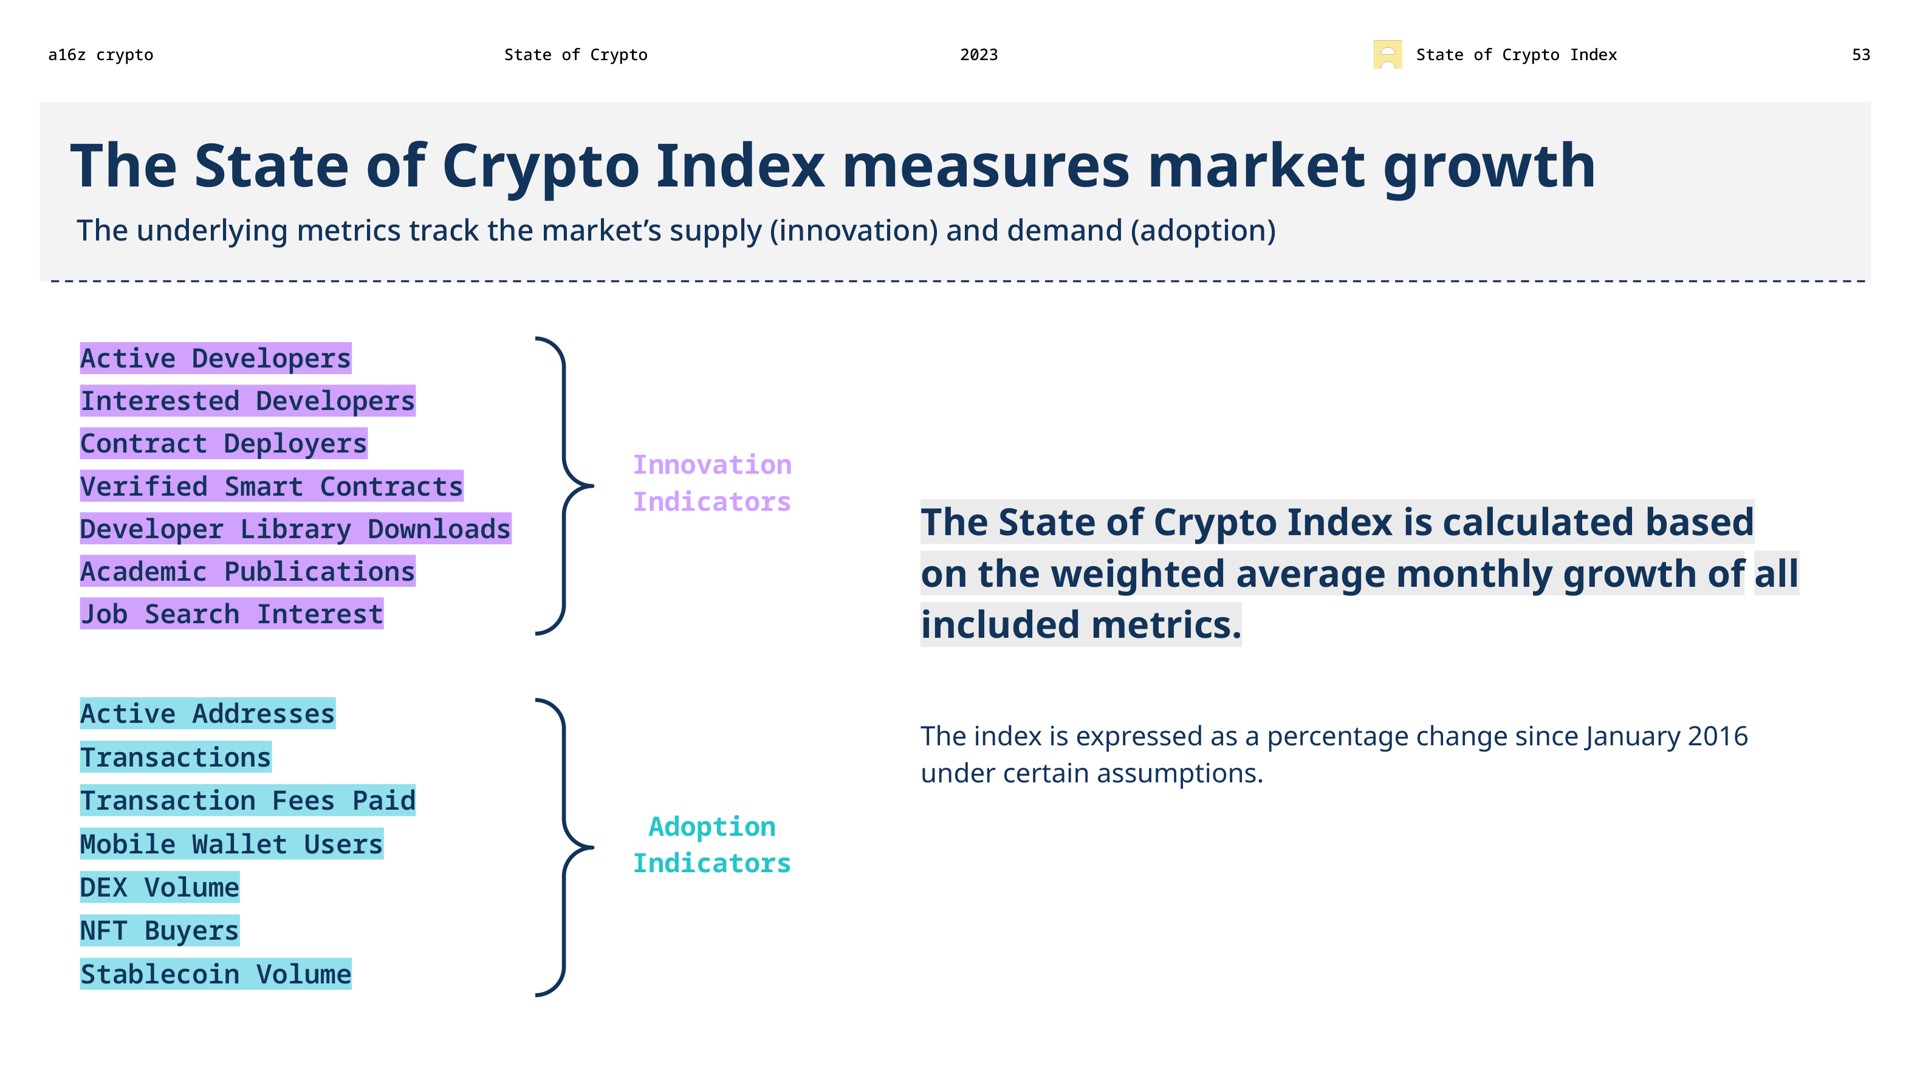 the state of index measures market growth the state of index is calculated based on the weighted average monthly growth of all included metrics underlying track supply innovation and demand adoption | a16z